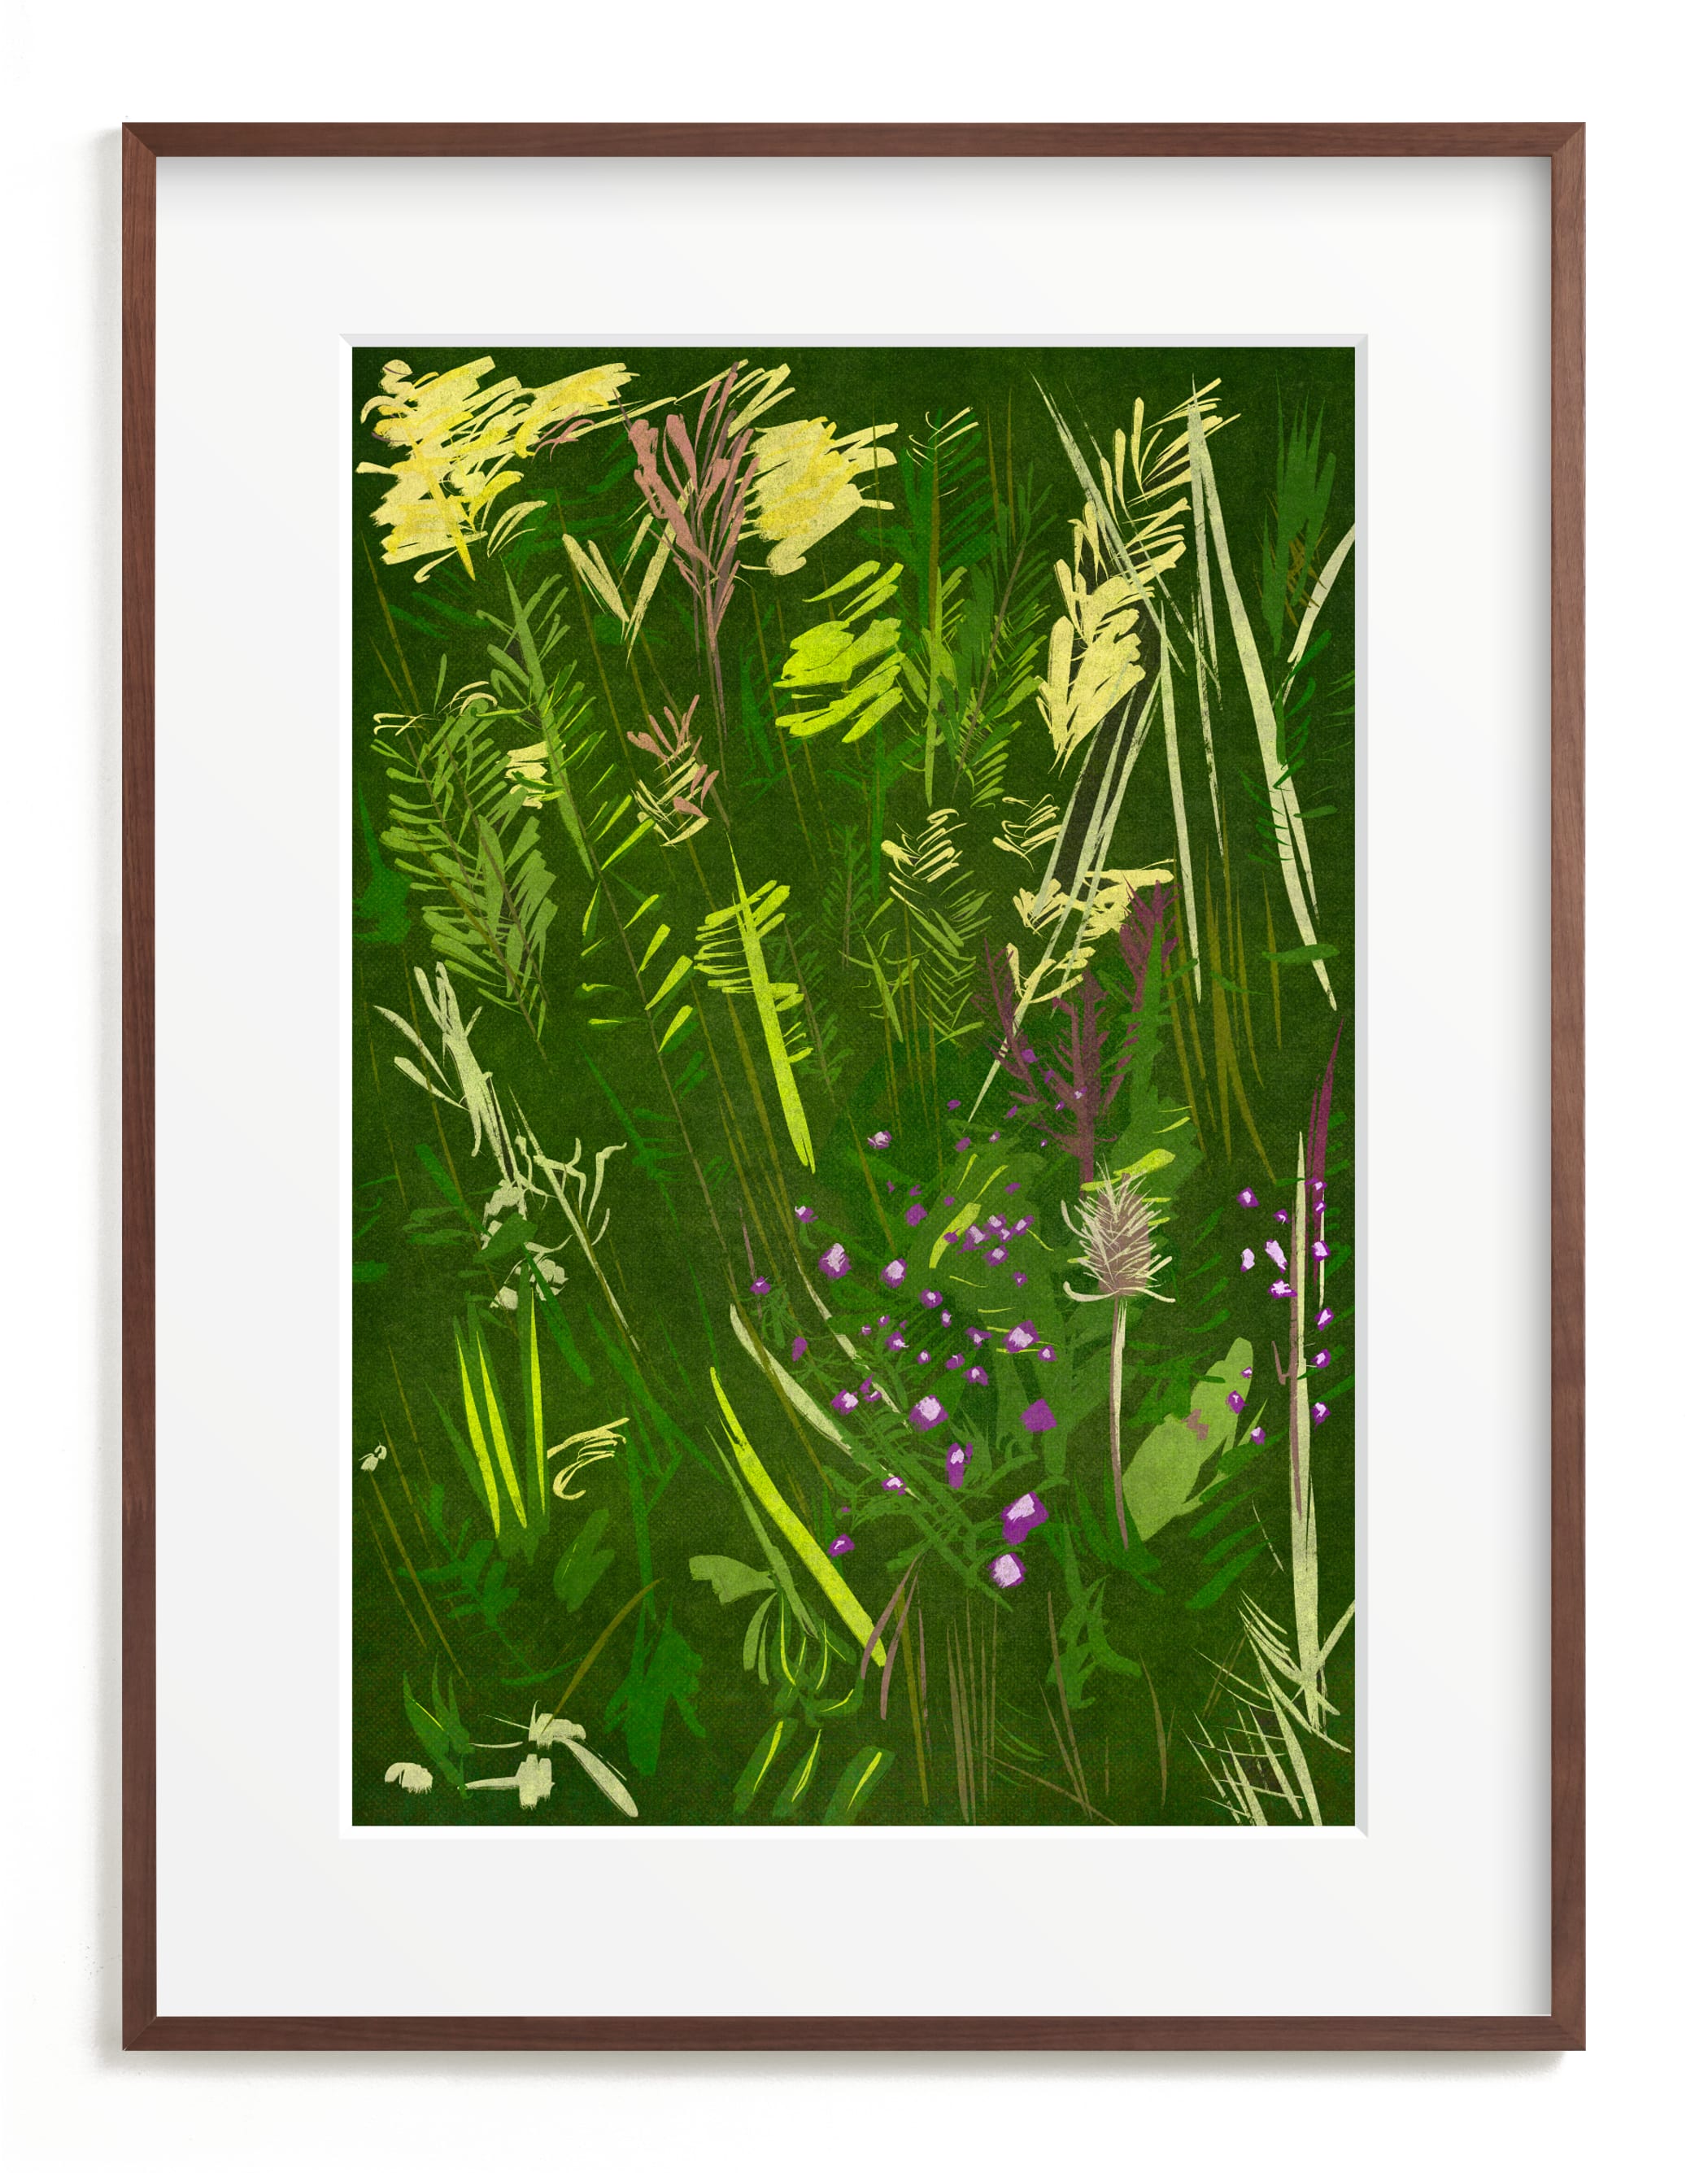 A View in Green Wall Art Print